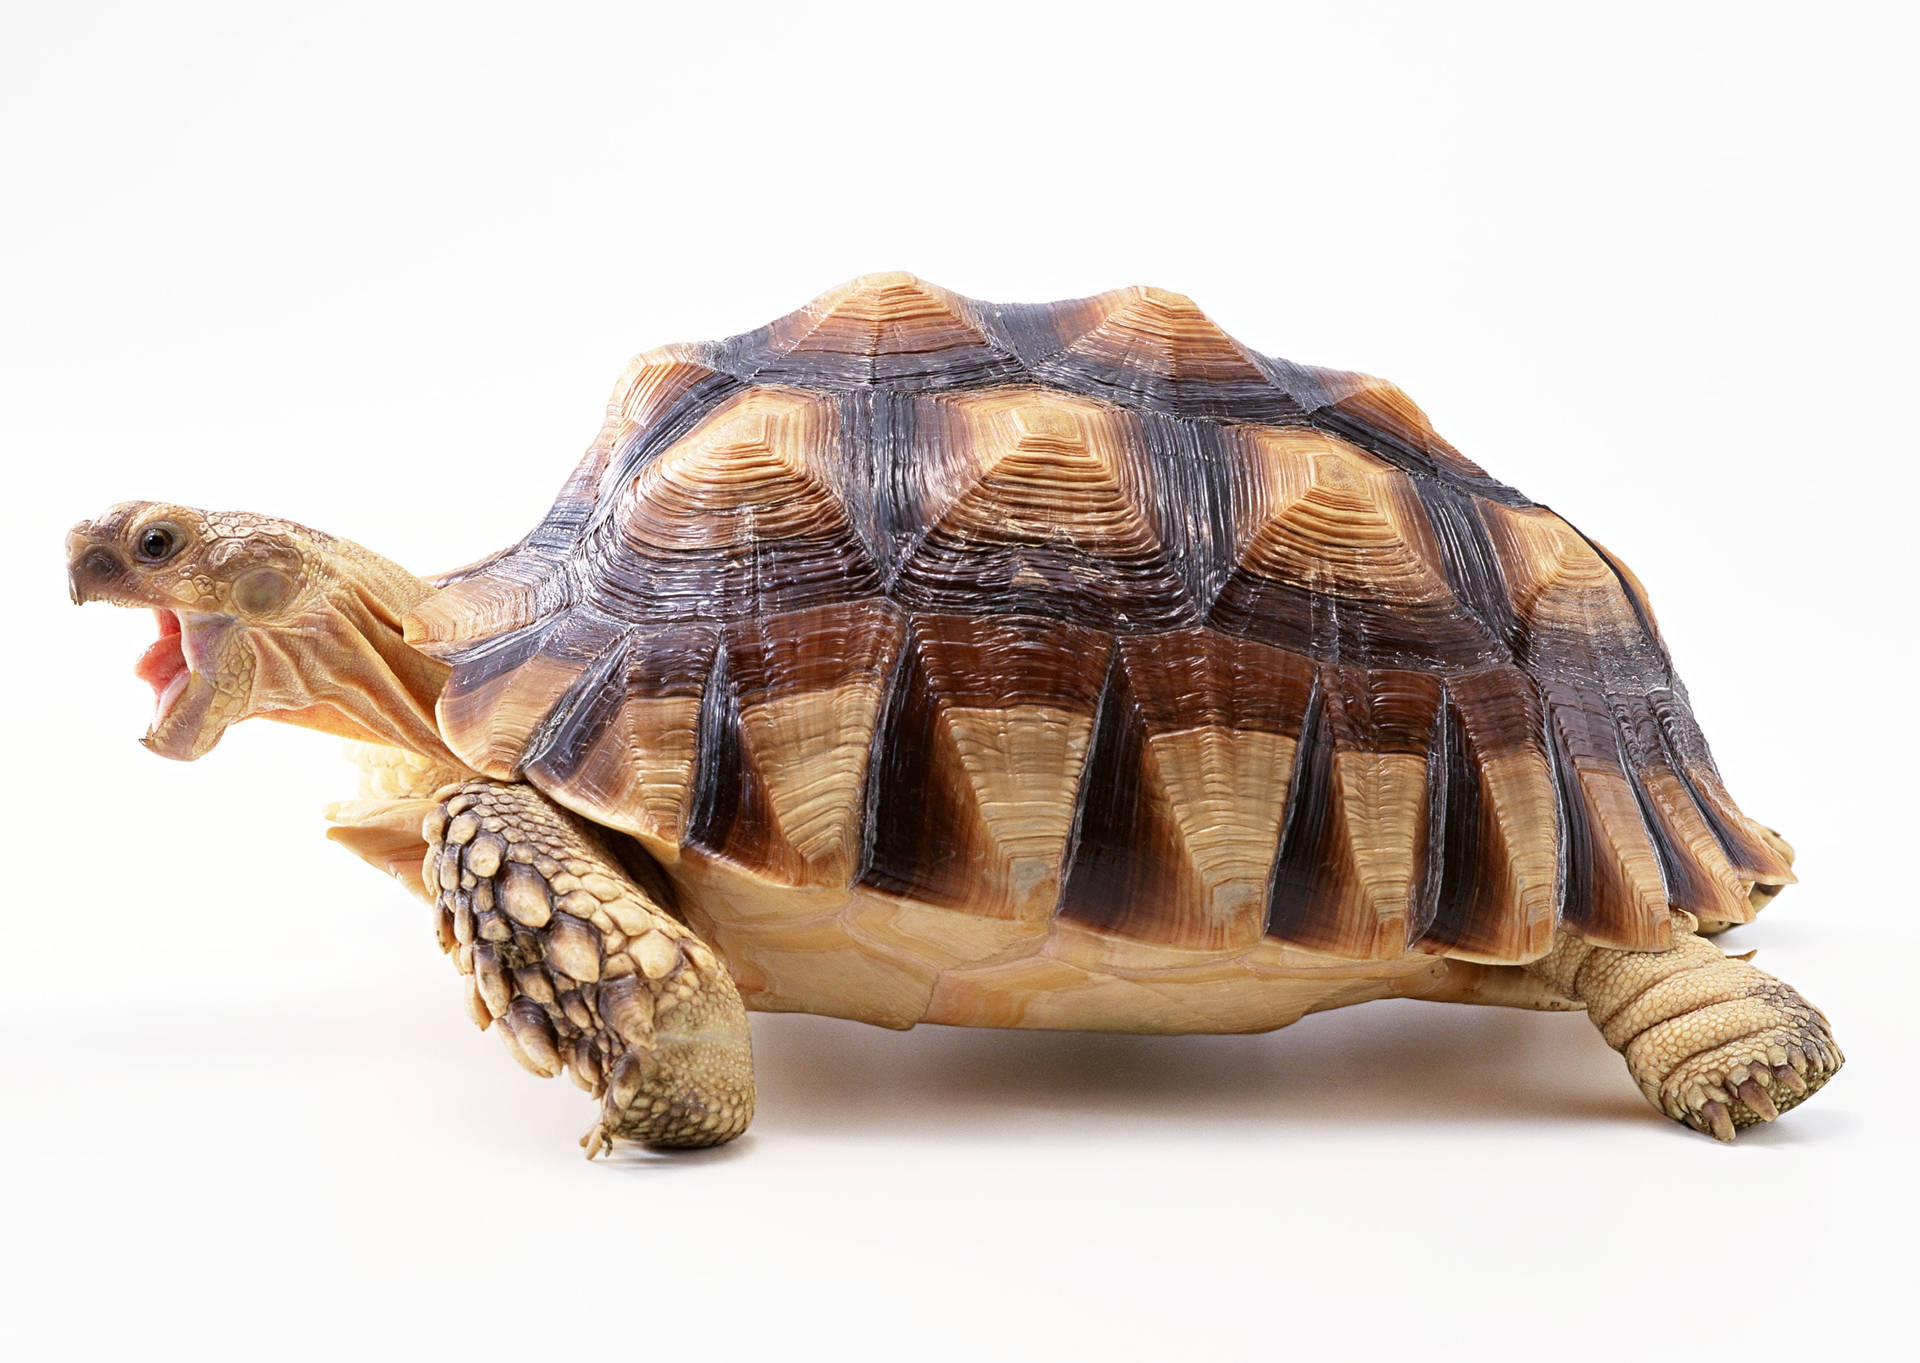 Tortoise With Amazing Shell Patterns Wallpaper